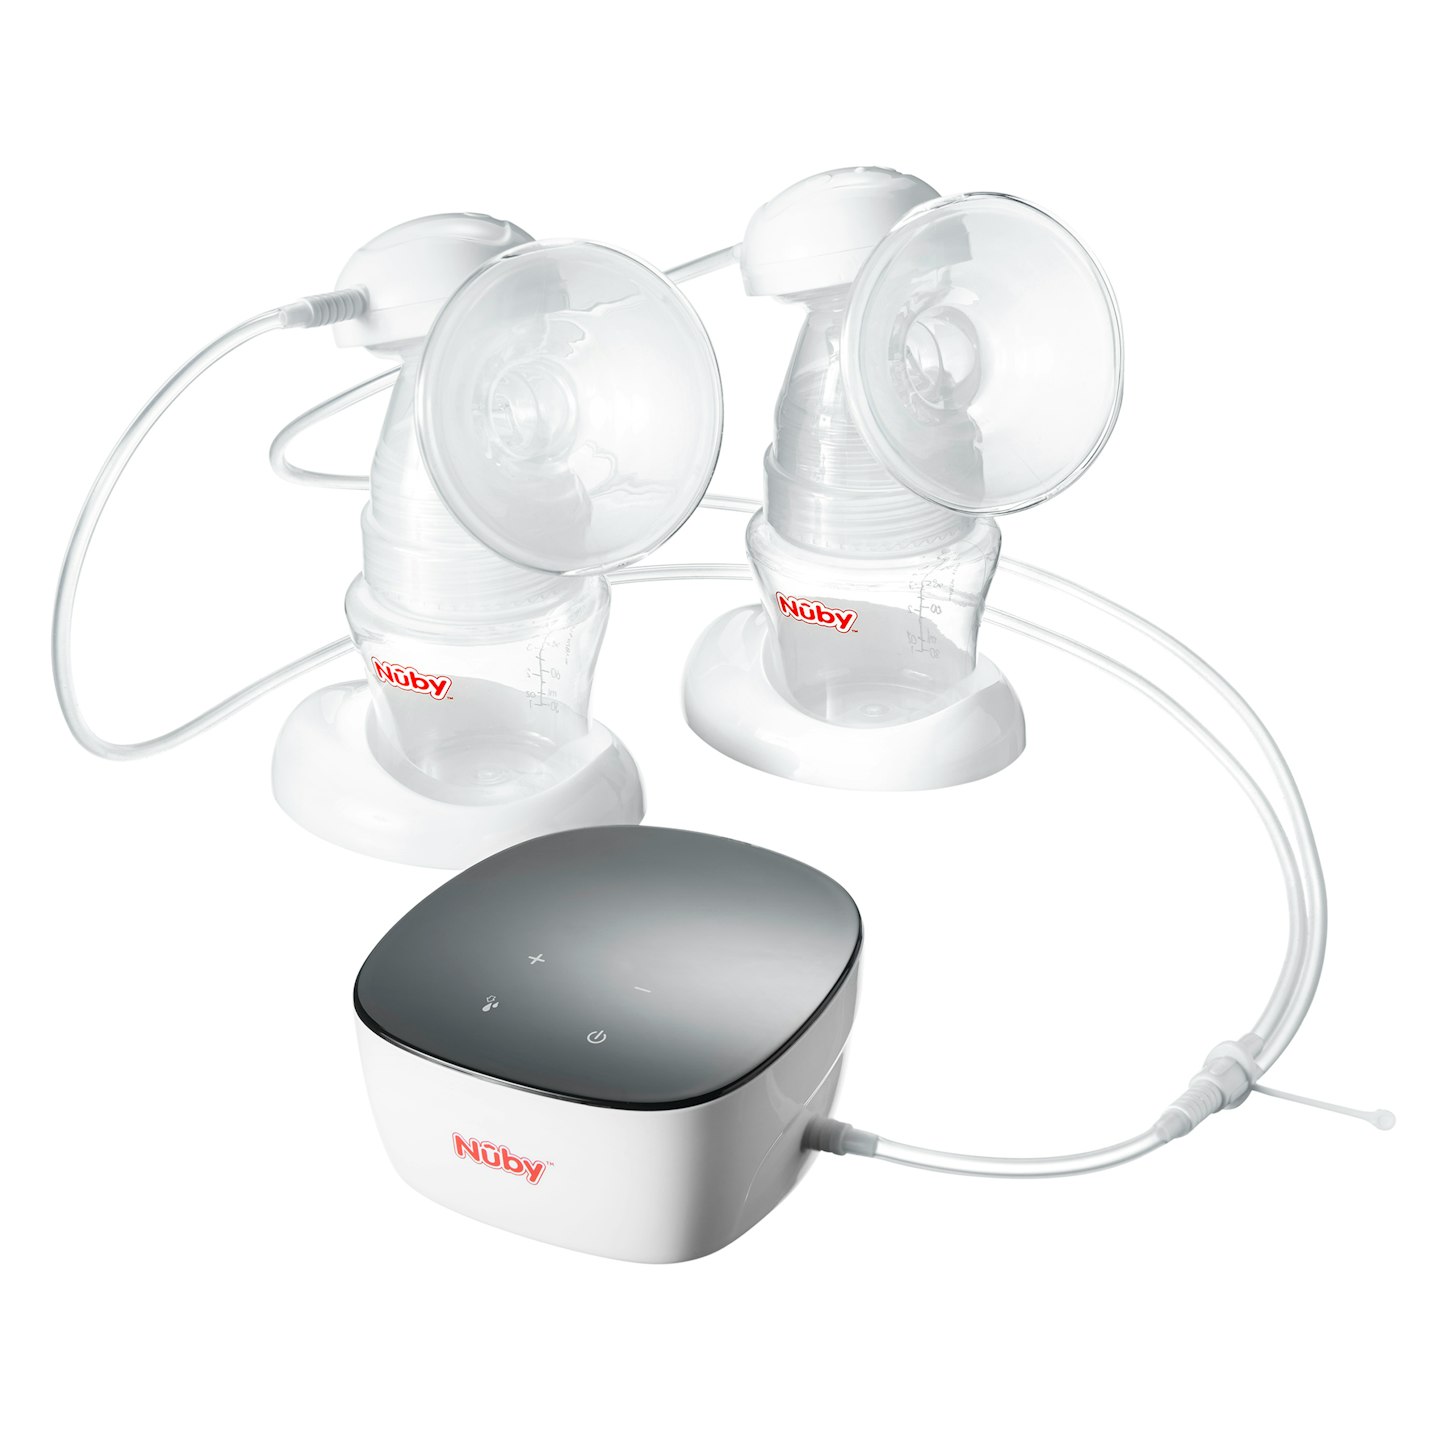 Nuby Ultimate Double Breast Pump